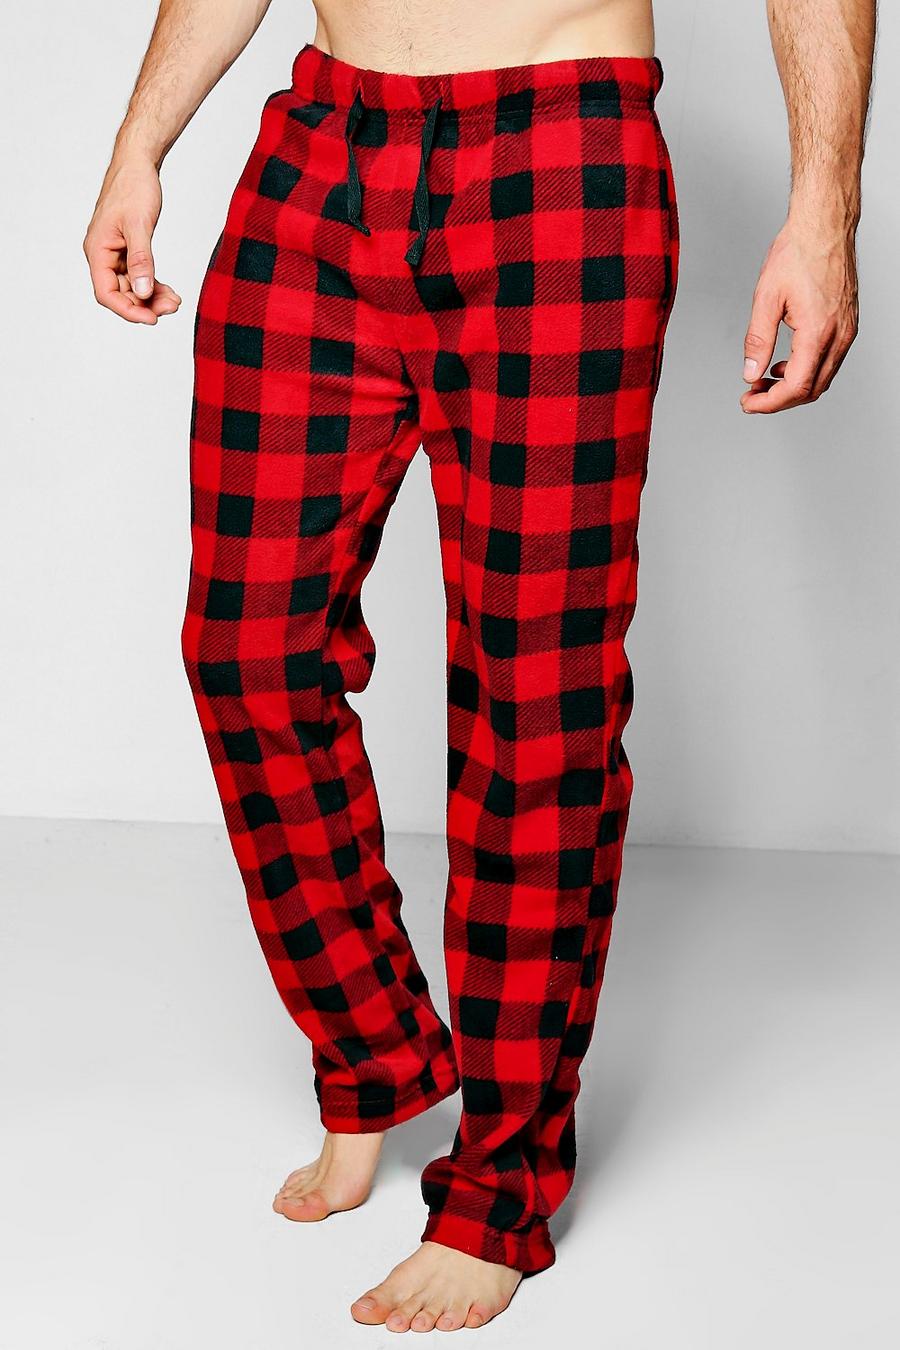 https://media.boohoo.com/i/boohoo/mzz68490_red_xl/male-red-black-and-red-checked-fleece-pajama-pants/?w=900&qlt=default&fmt.jp2.qlt=70&fmt=auto&sm=fit